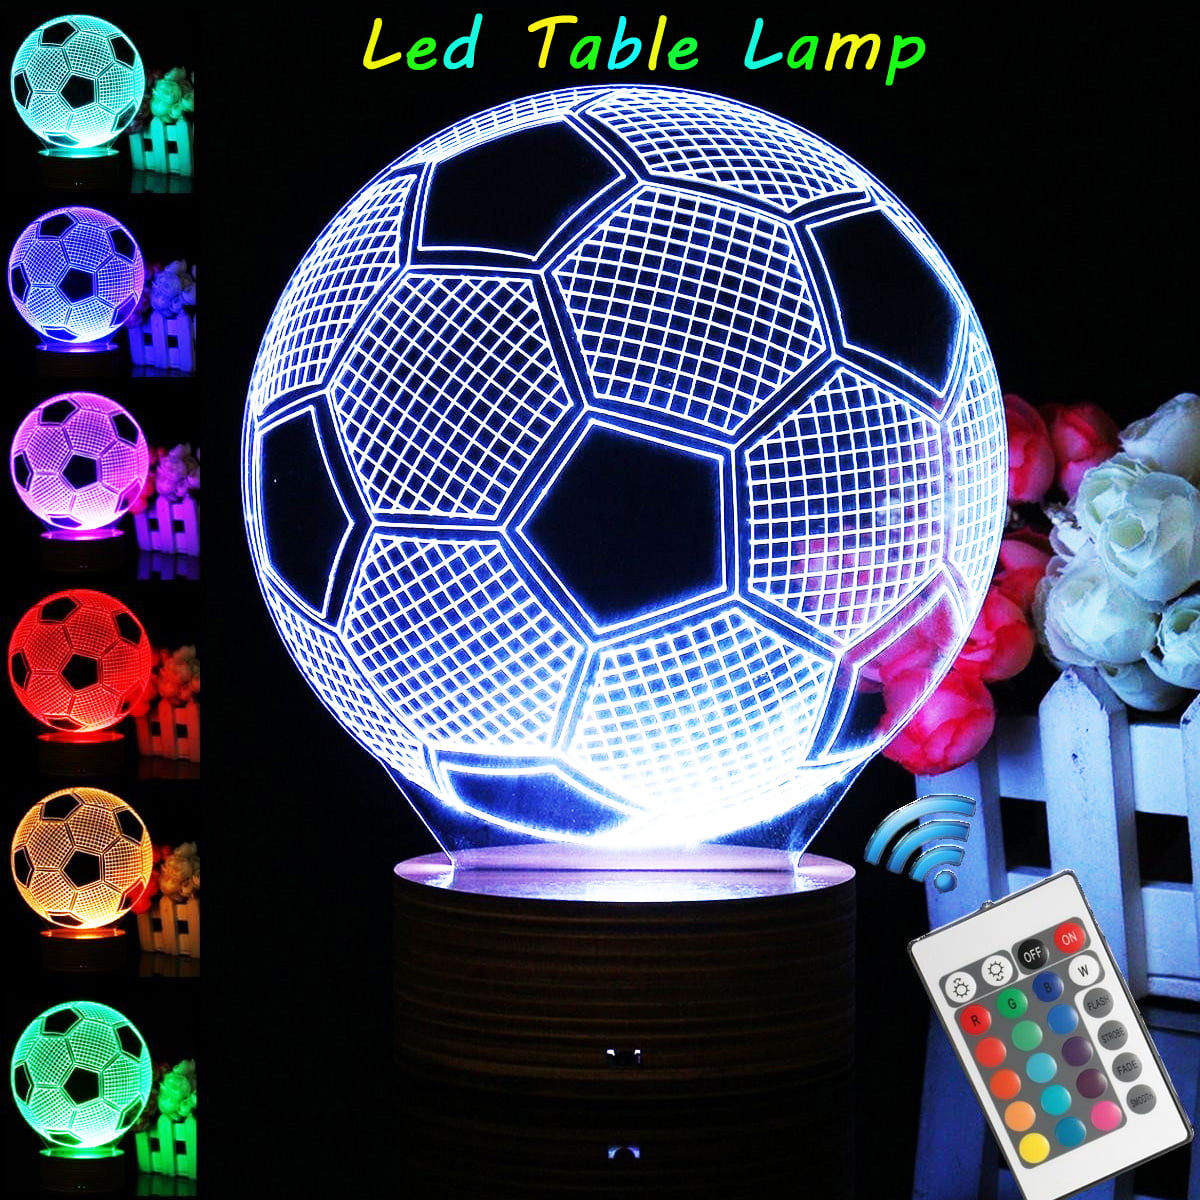 Pretty Cool Toys Gifts Birthday,Holiday,Valentines Day 3D Illusion Lamp 7 Colour Changing Acrylic LED Night Light with,Art Sculpture Lights Room Home Decoration+Remote Control,USB Charger Football 